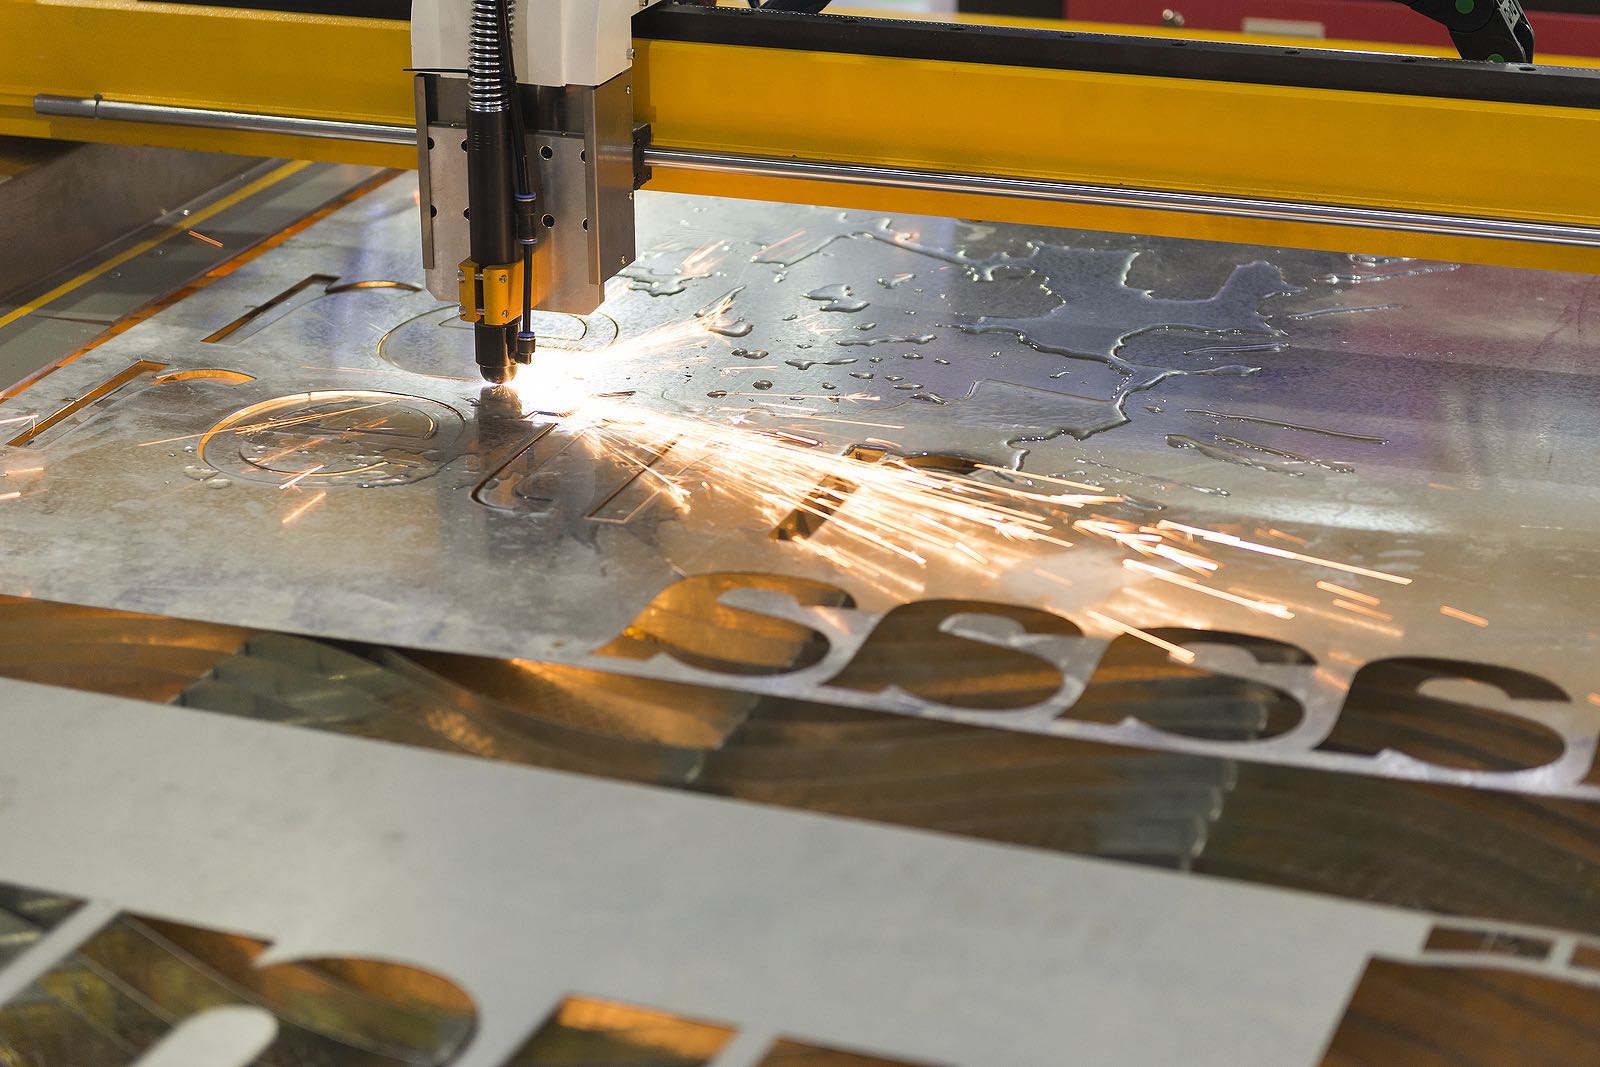 Why Laser Cutting Metal is the Best Method vs. Other Options